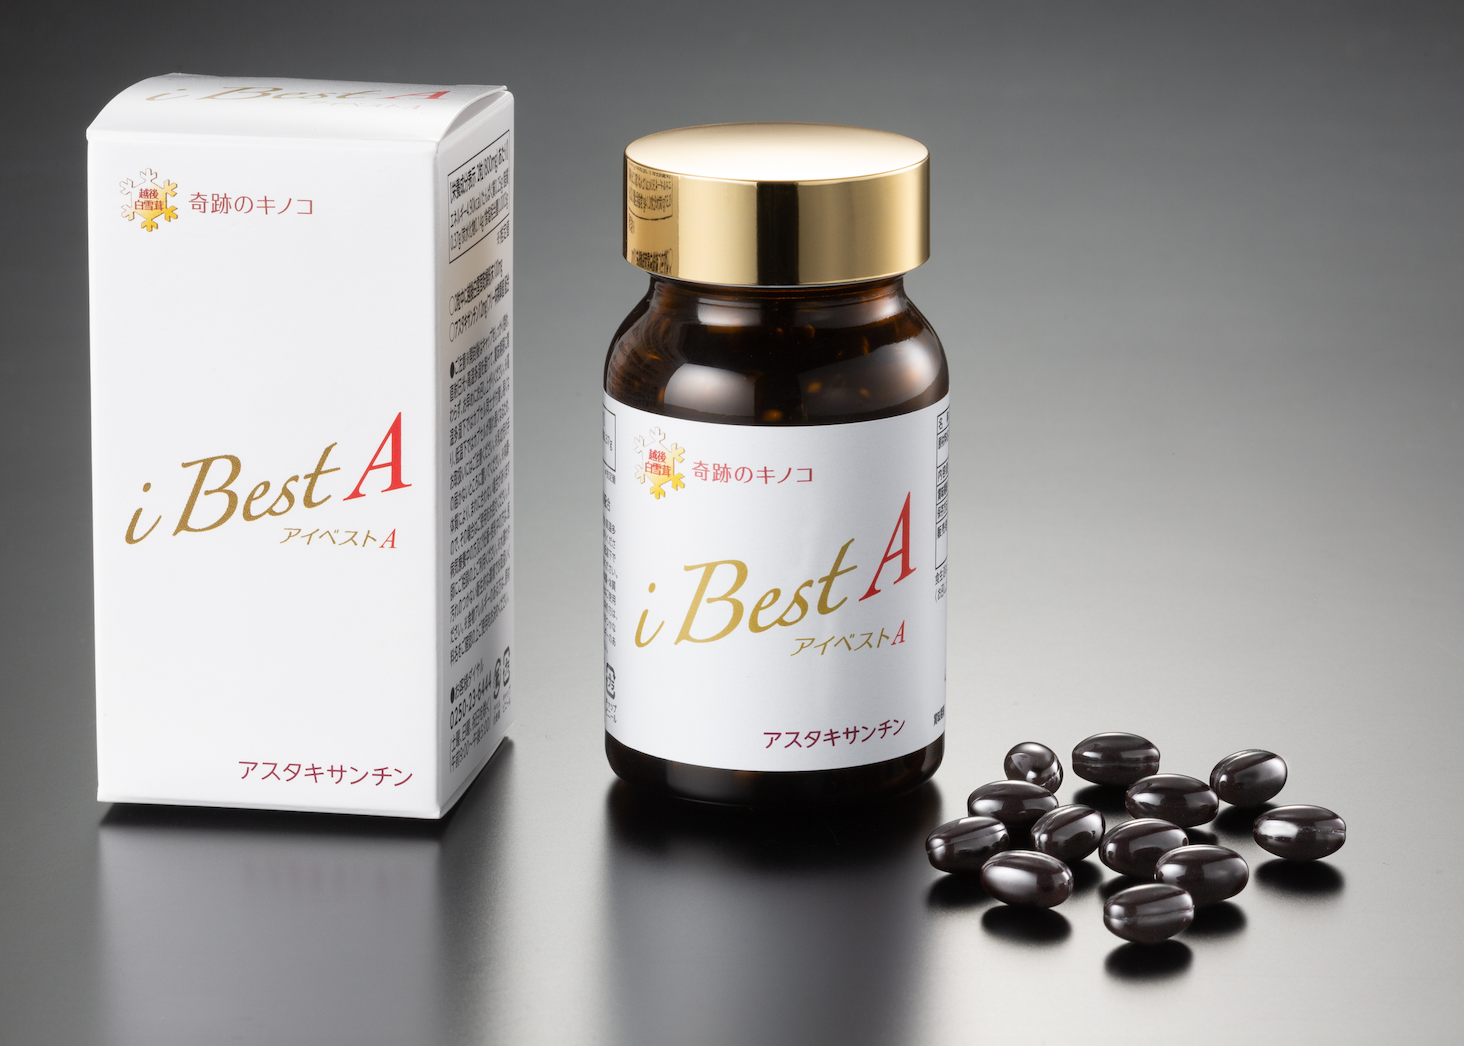 i BestA Supplement Echigo White Snow Basidiomycetes-X Extract Nutrition & Revitalization　400mg X60 capsuls Made in Japan